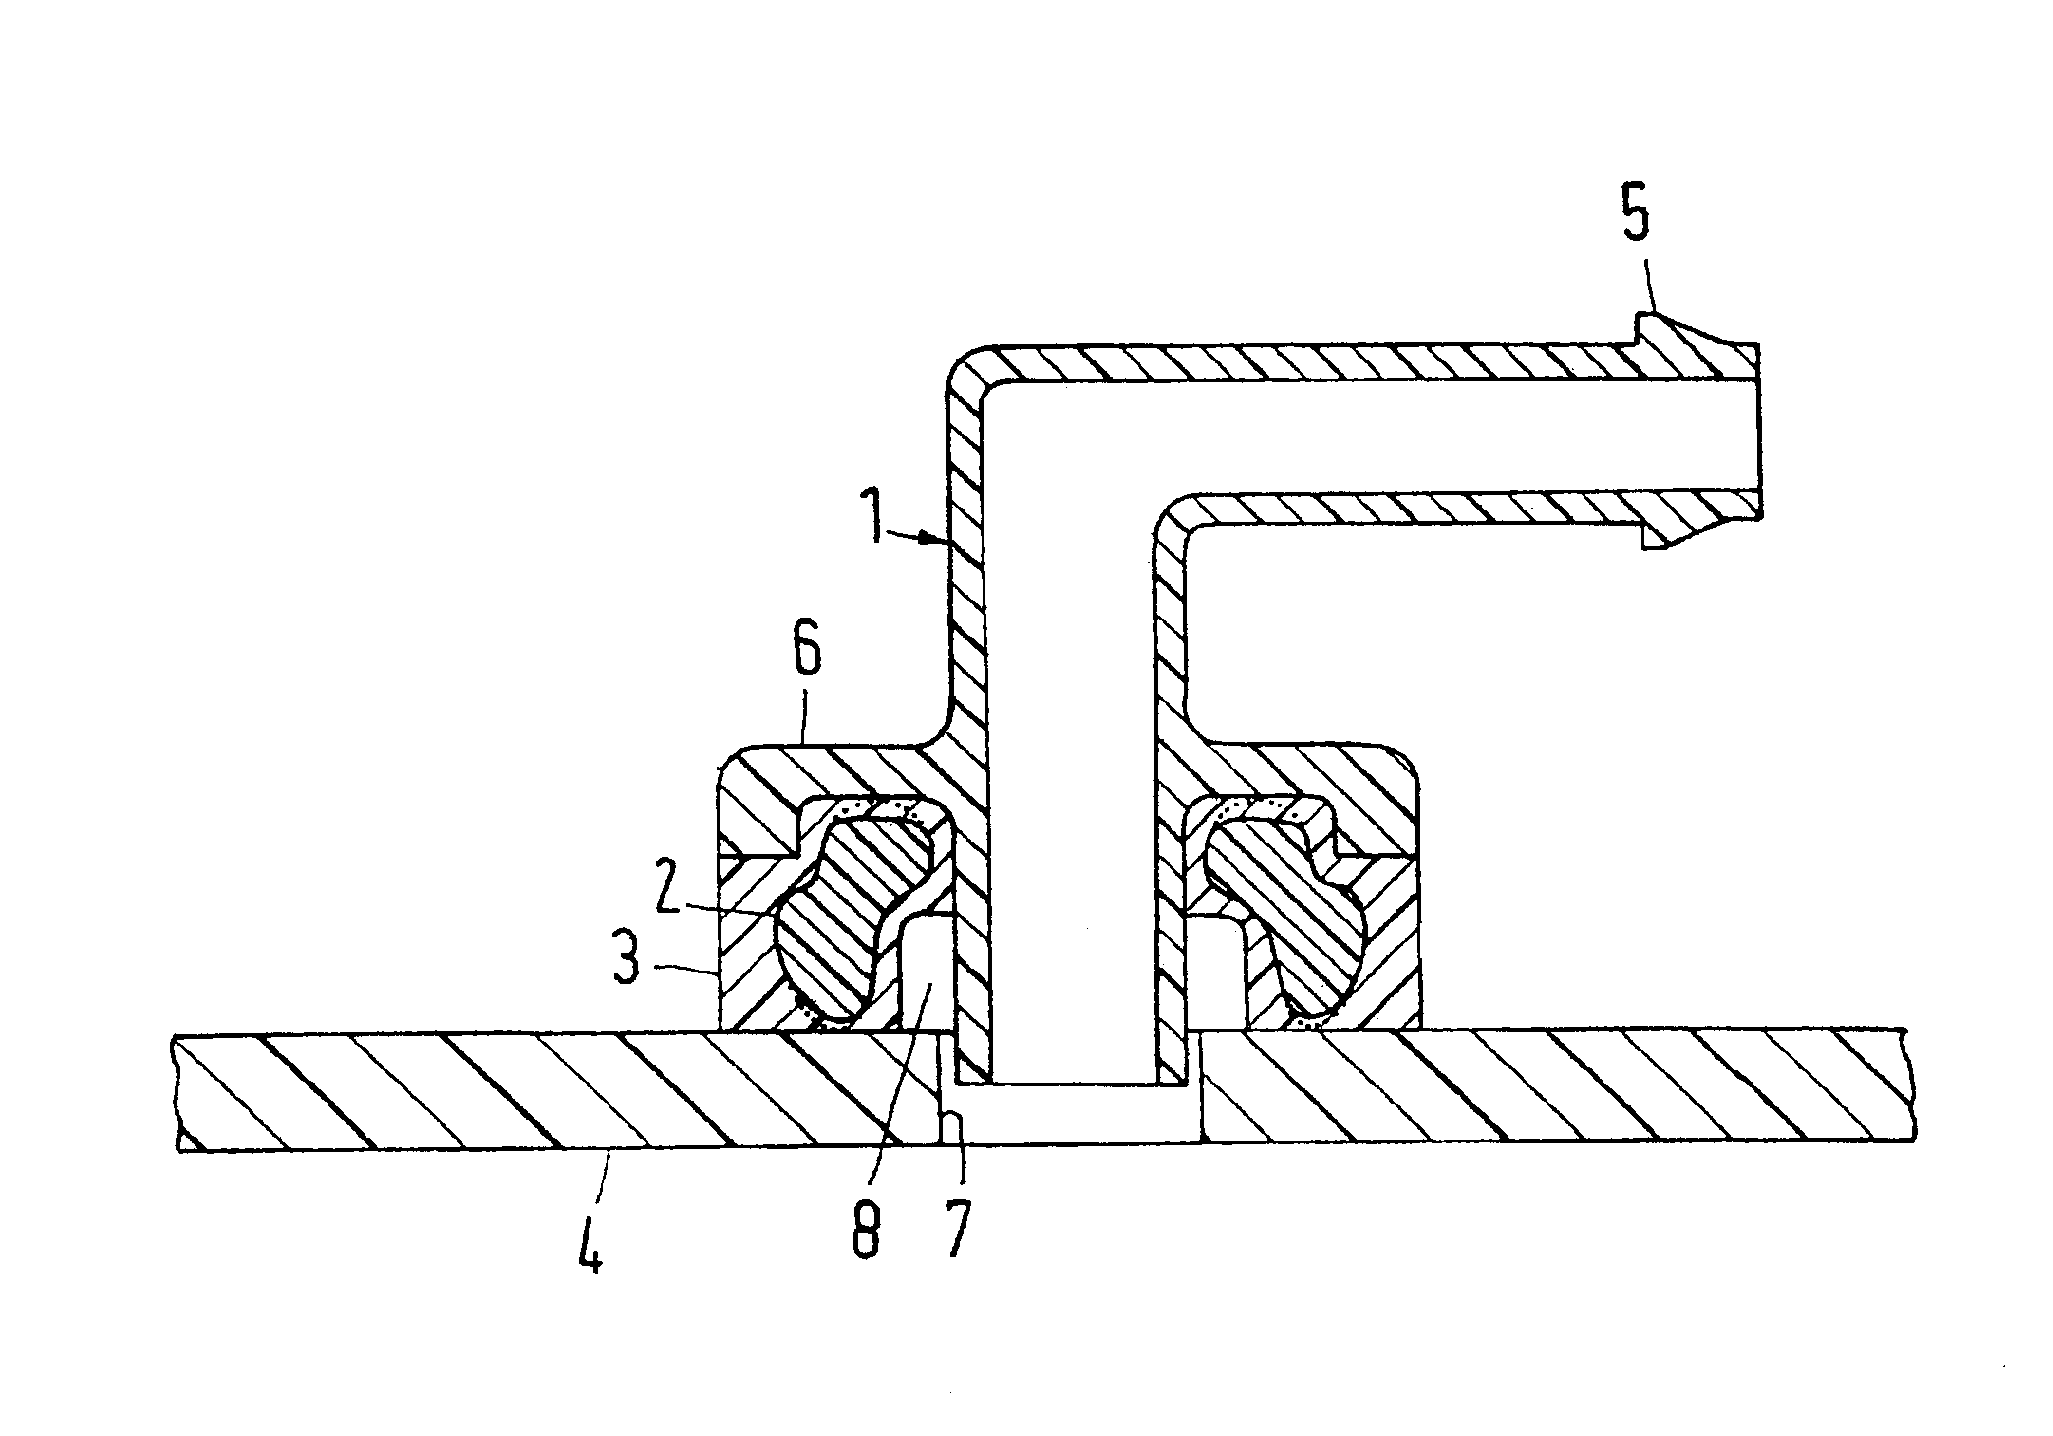 Coupling member for connecting a fuel receiving or fuel dispensing part to a fluid line and method for its manufacture